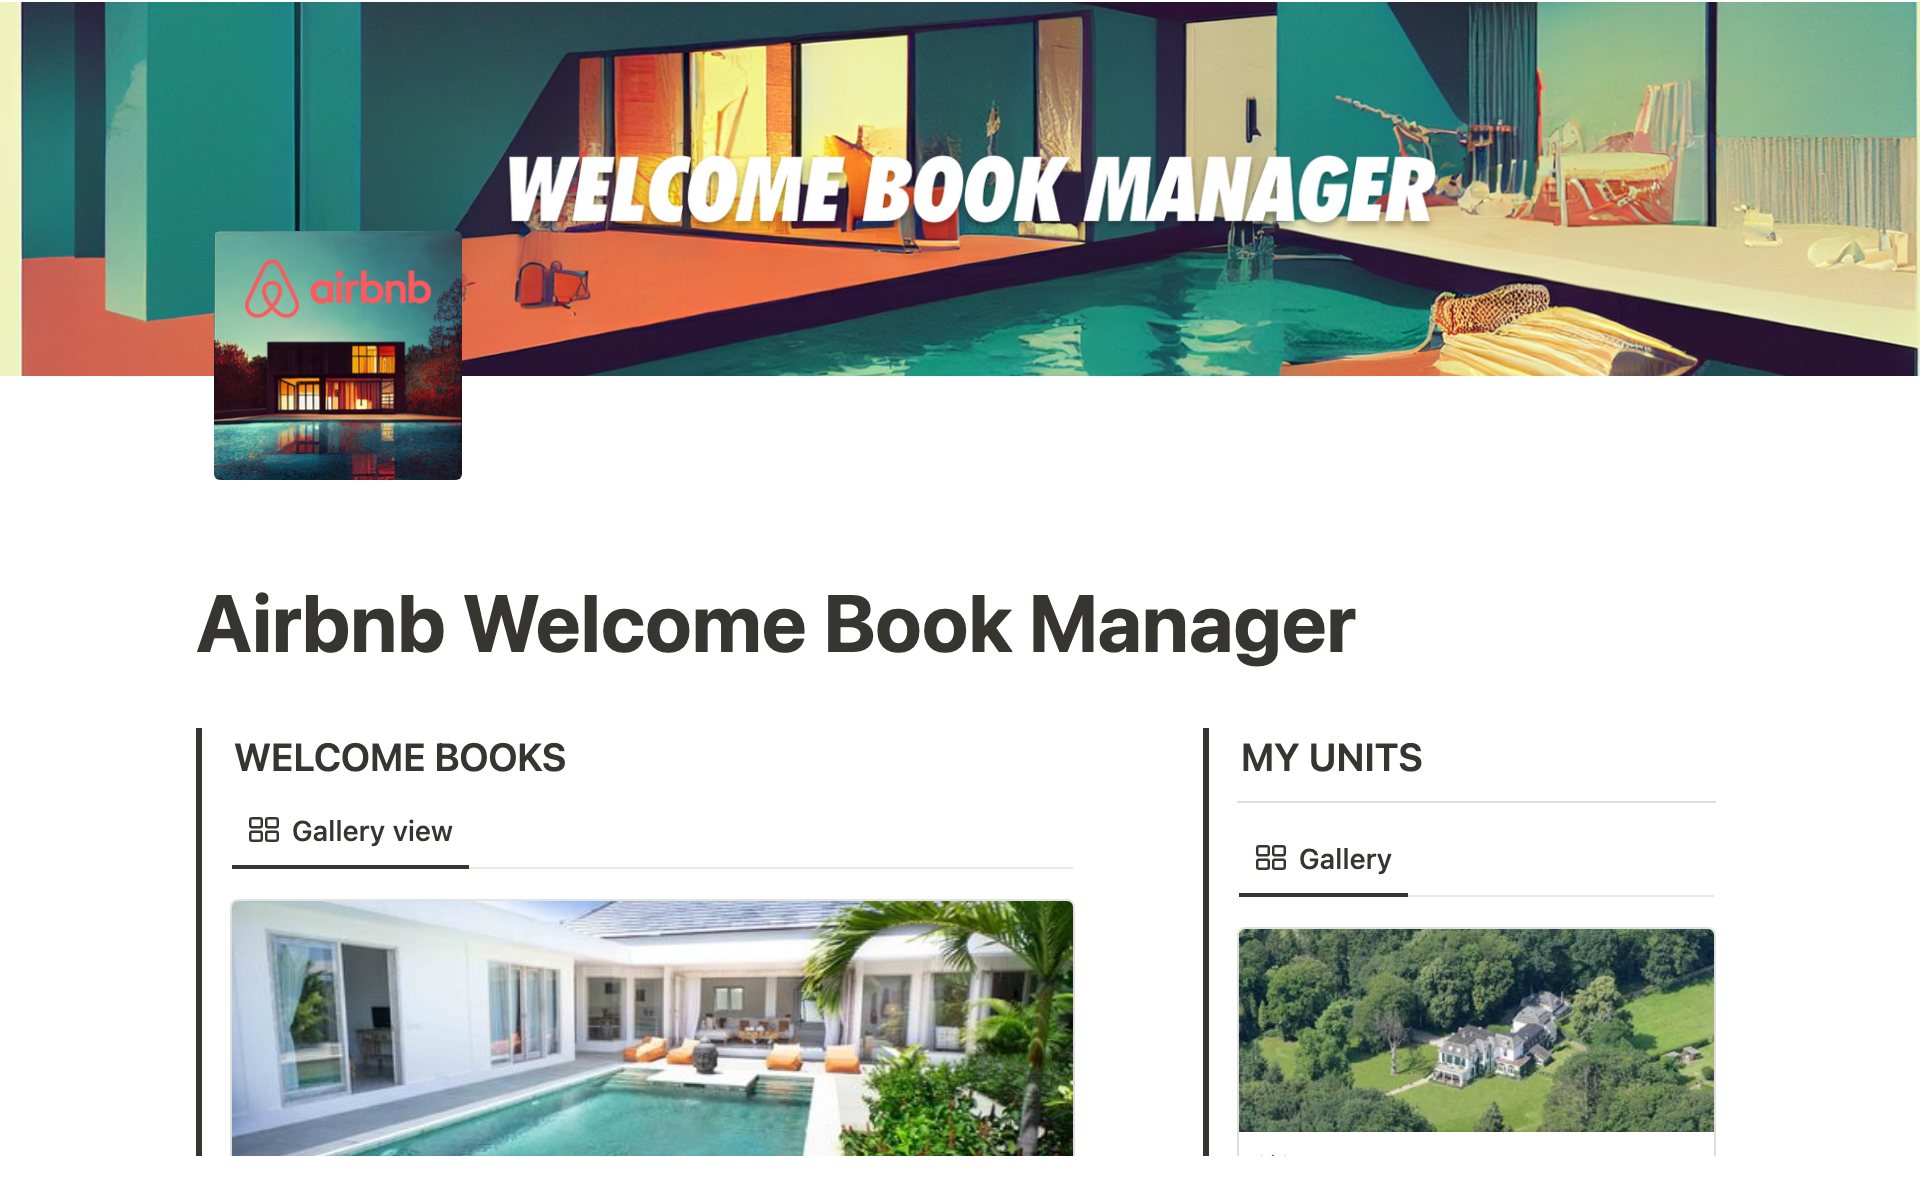 Manage your AirBnb Welcome Books with ease